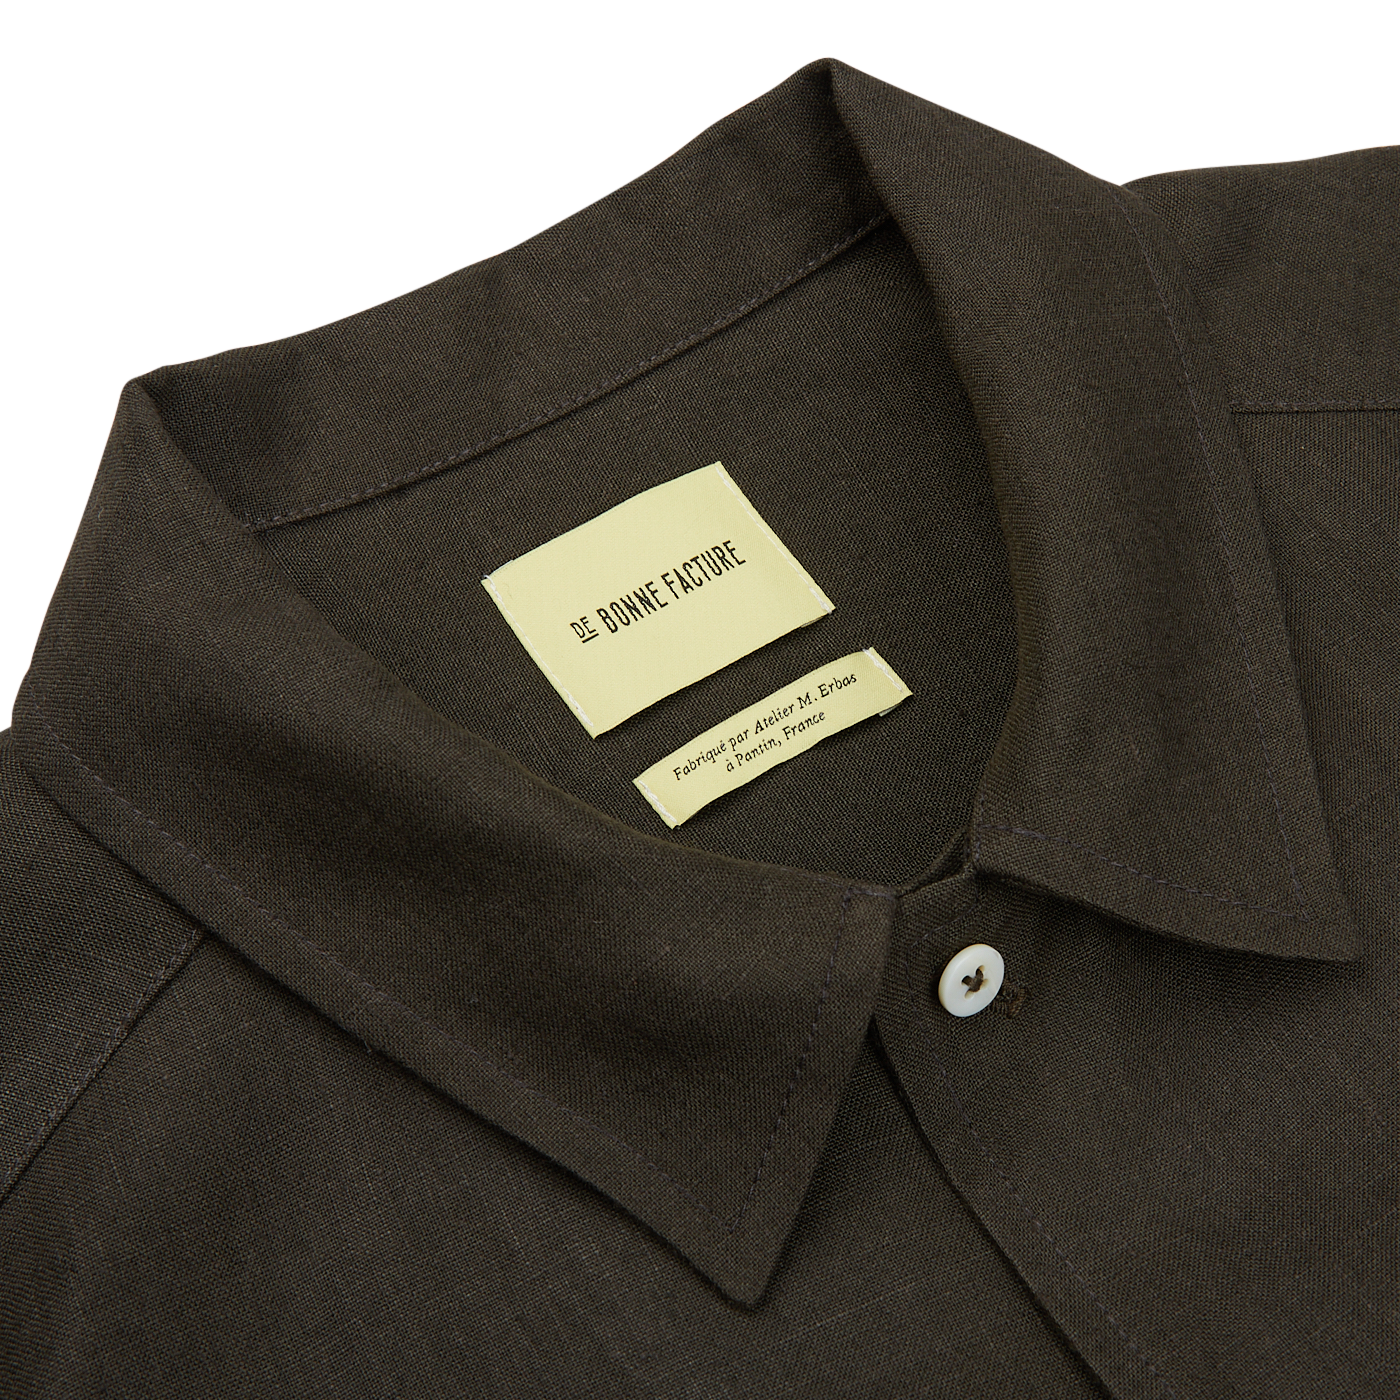 Close-up of a De Bonne Facture Arabica Green Linen Canvas Painter's Jacket with a white label inside the collar reading "le chicke future. property of jonah maraq stean.